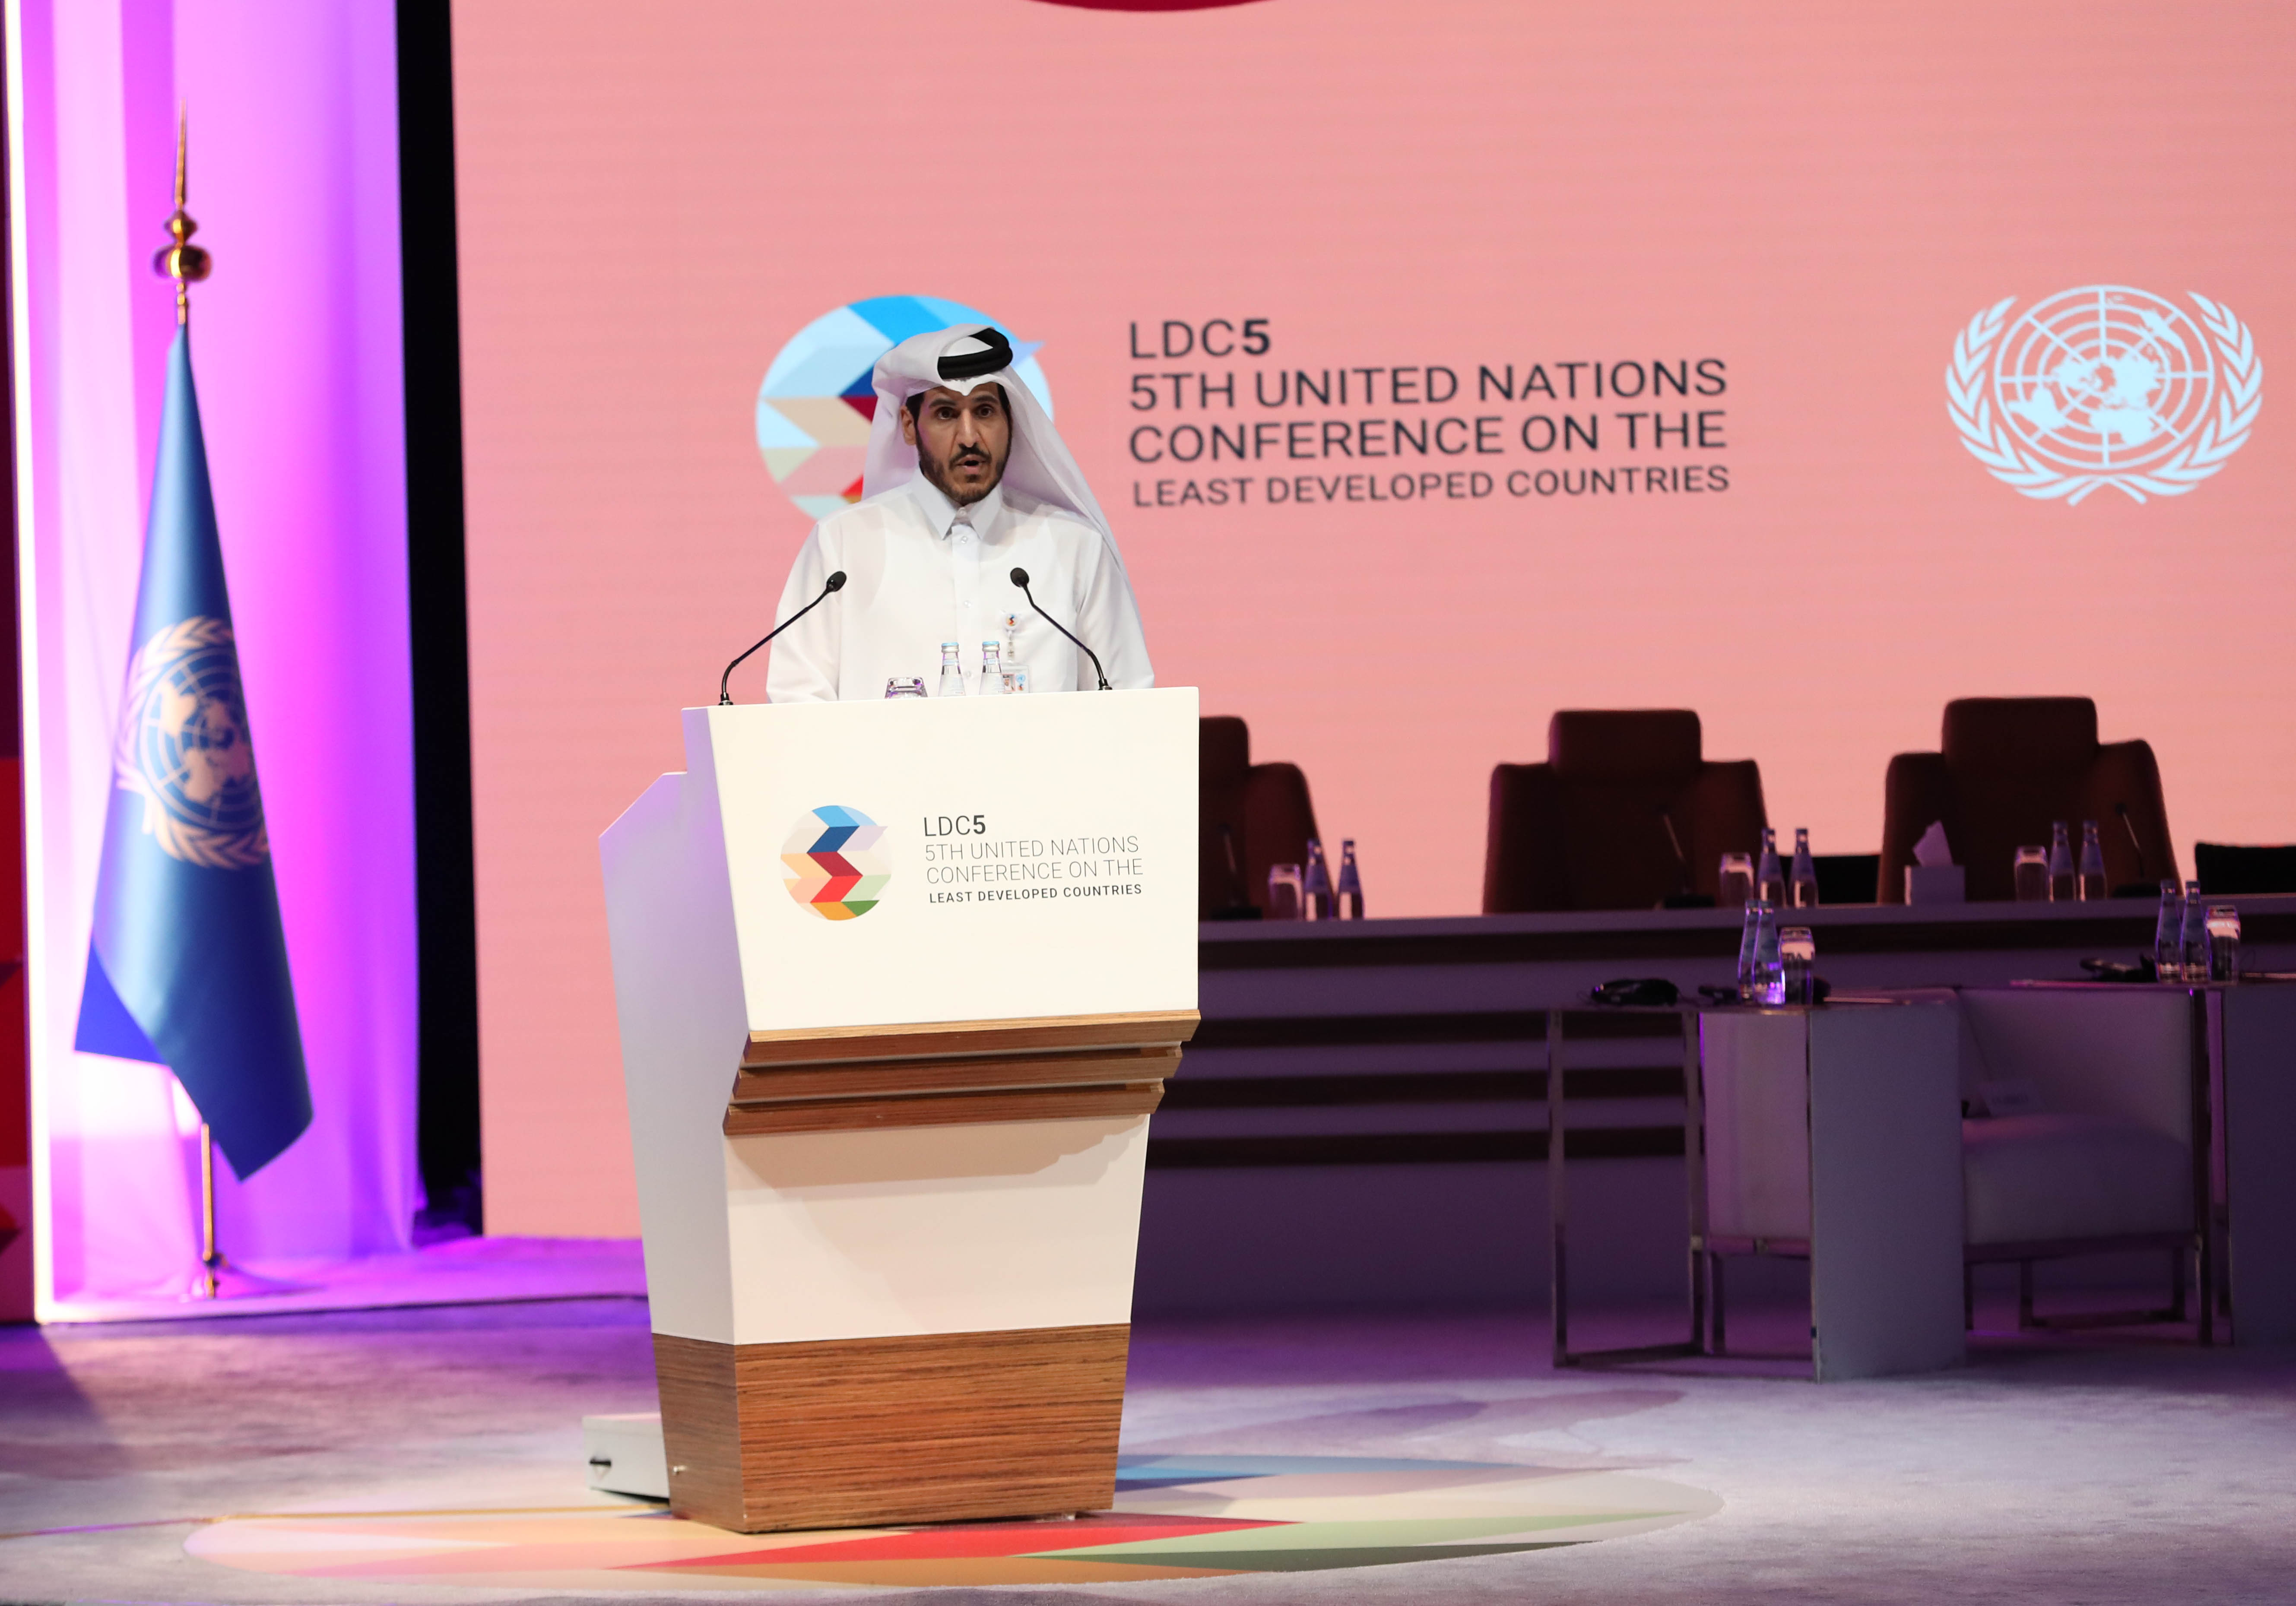 H.E. Minister of Commerce and Industry participates in the Closing Ceremony of the Private Sector Forum